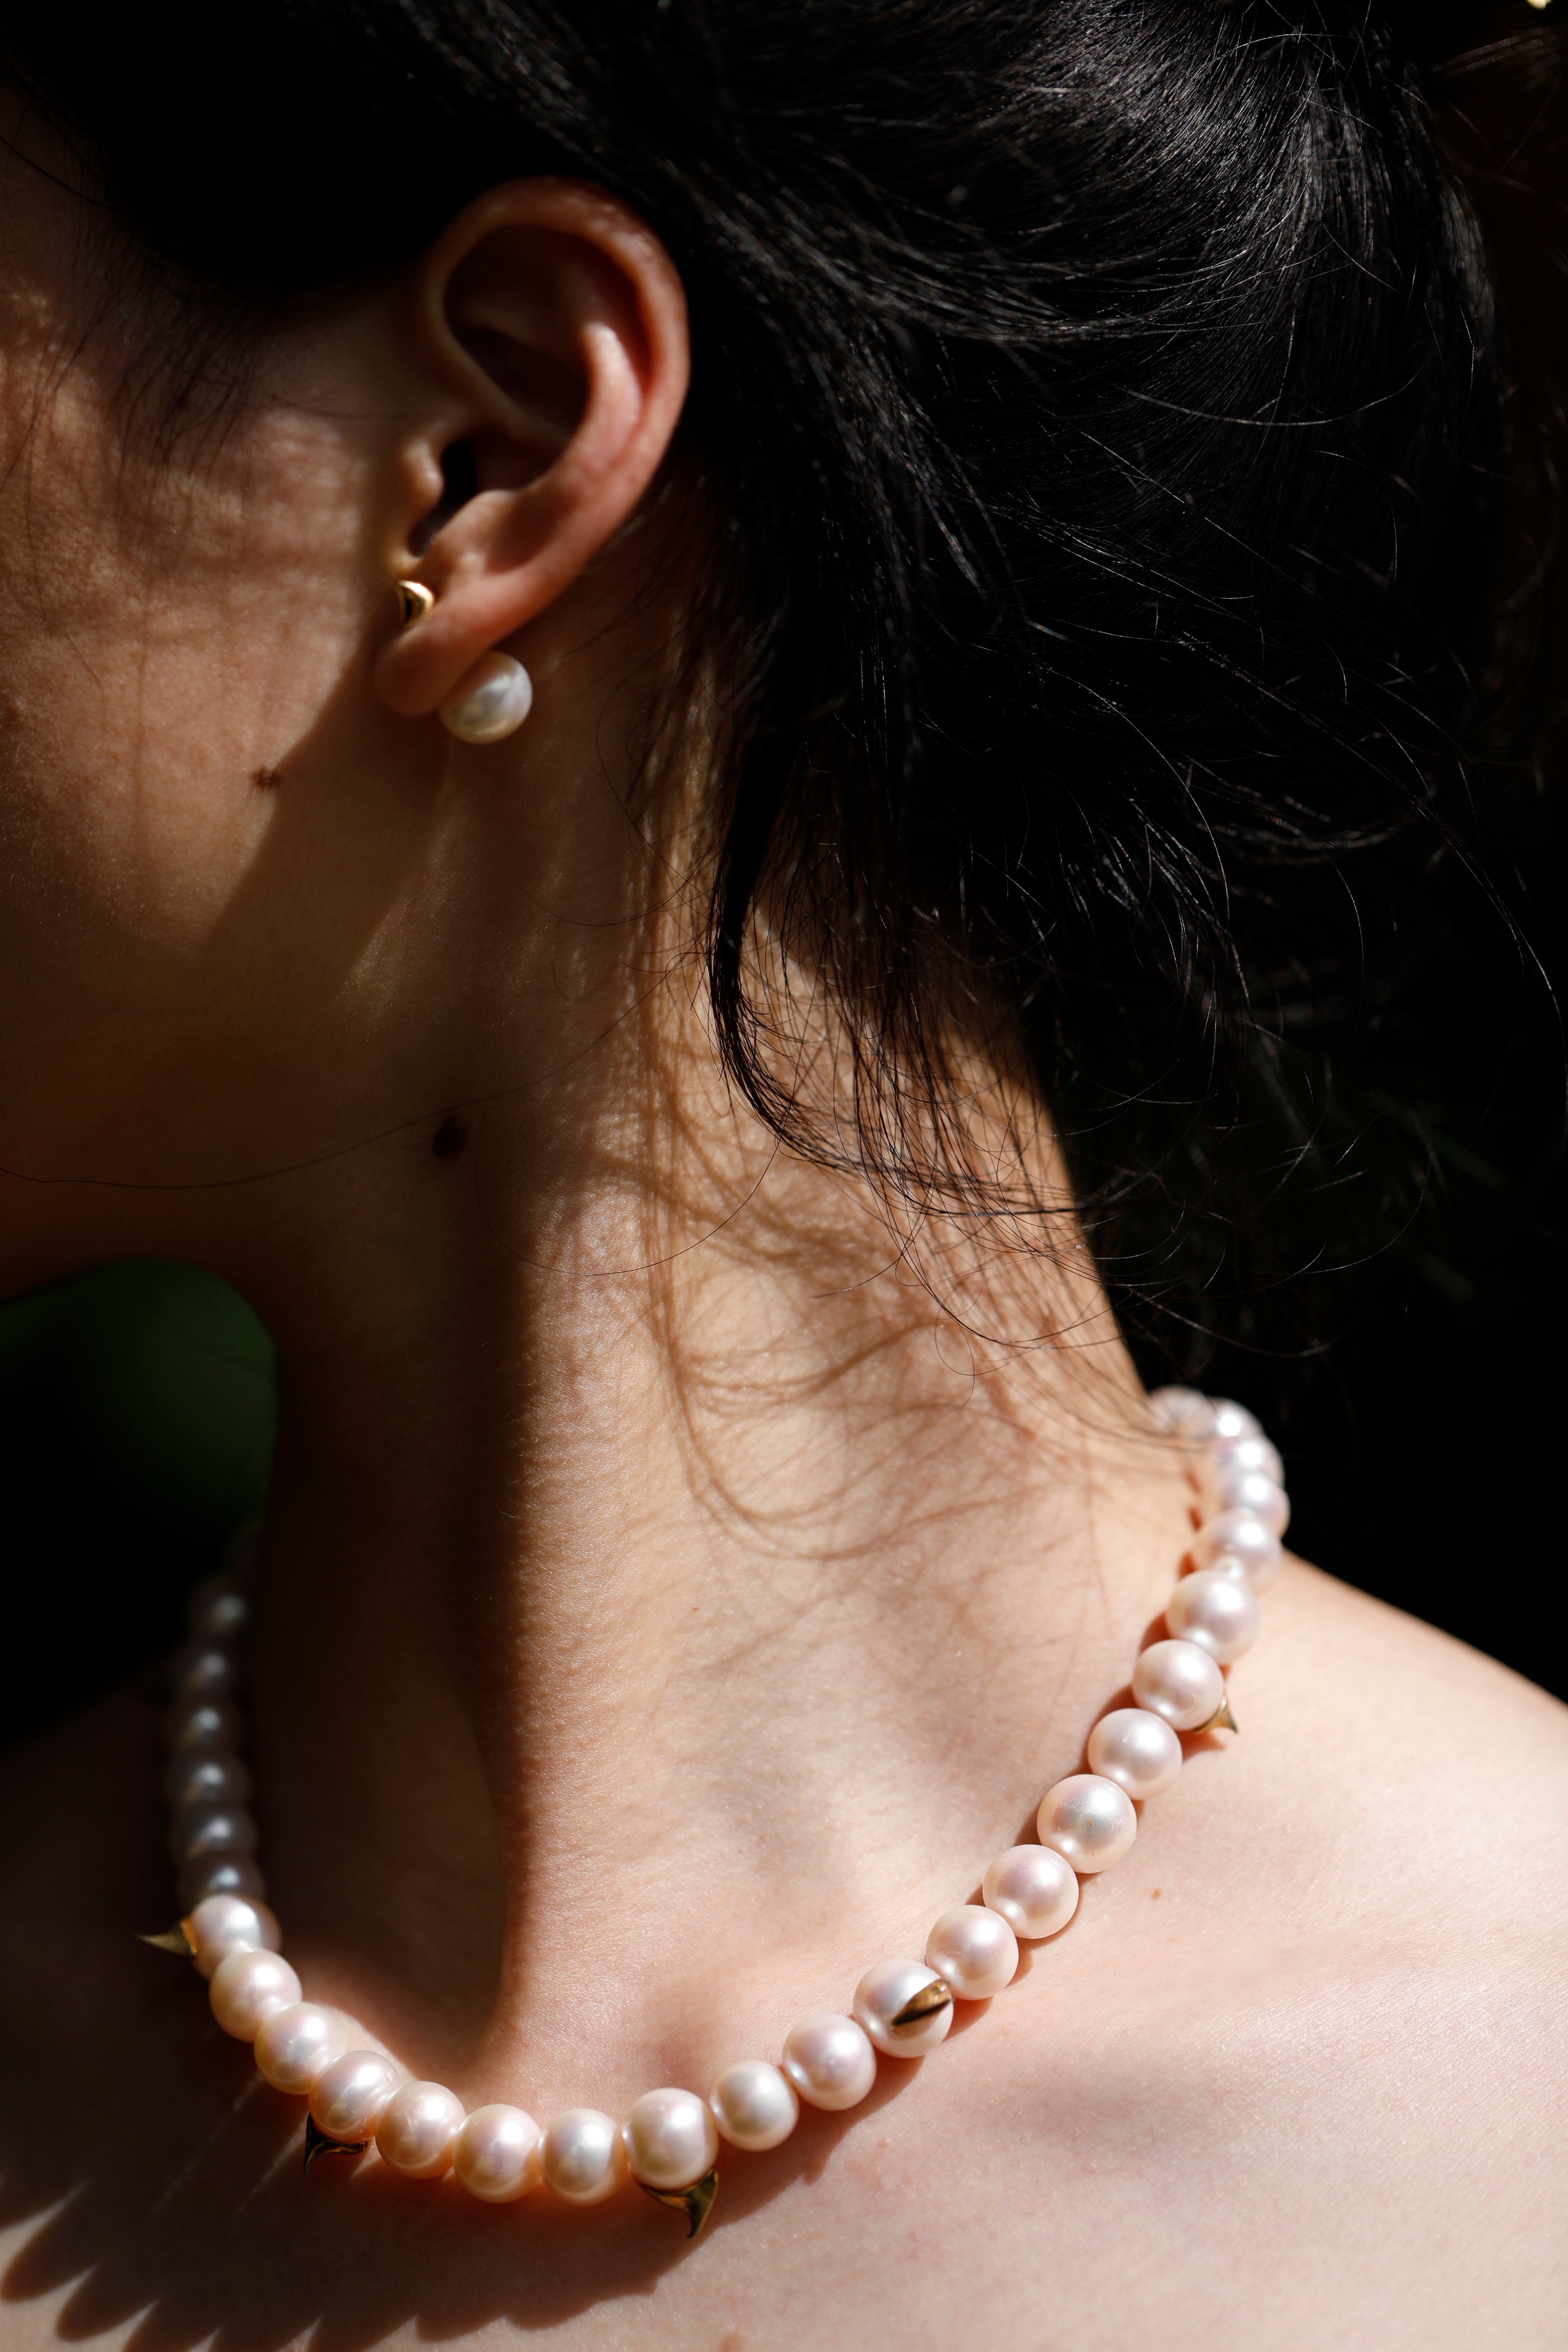 Embrace Me! Pearl Necklace